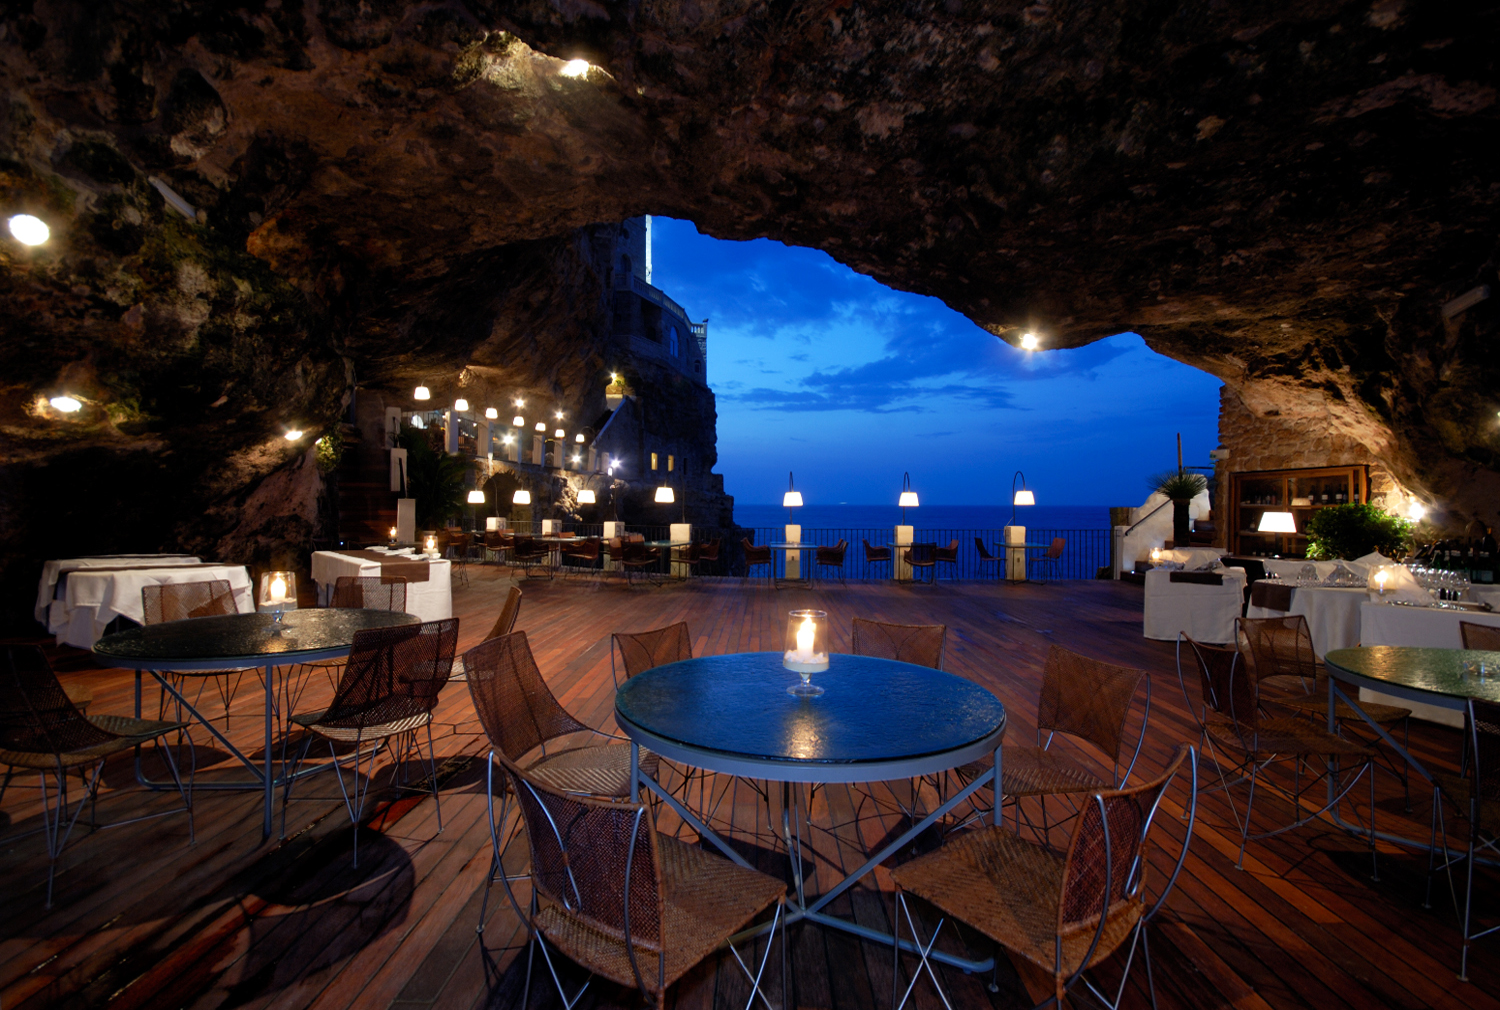 Restaurant inside a cave in Italy